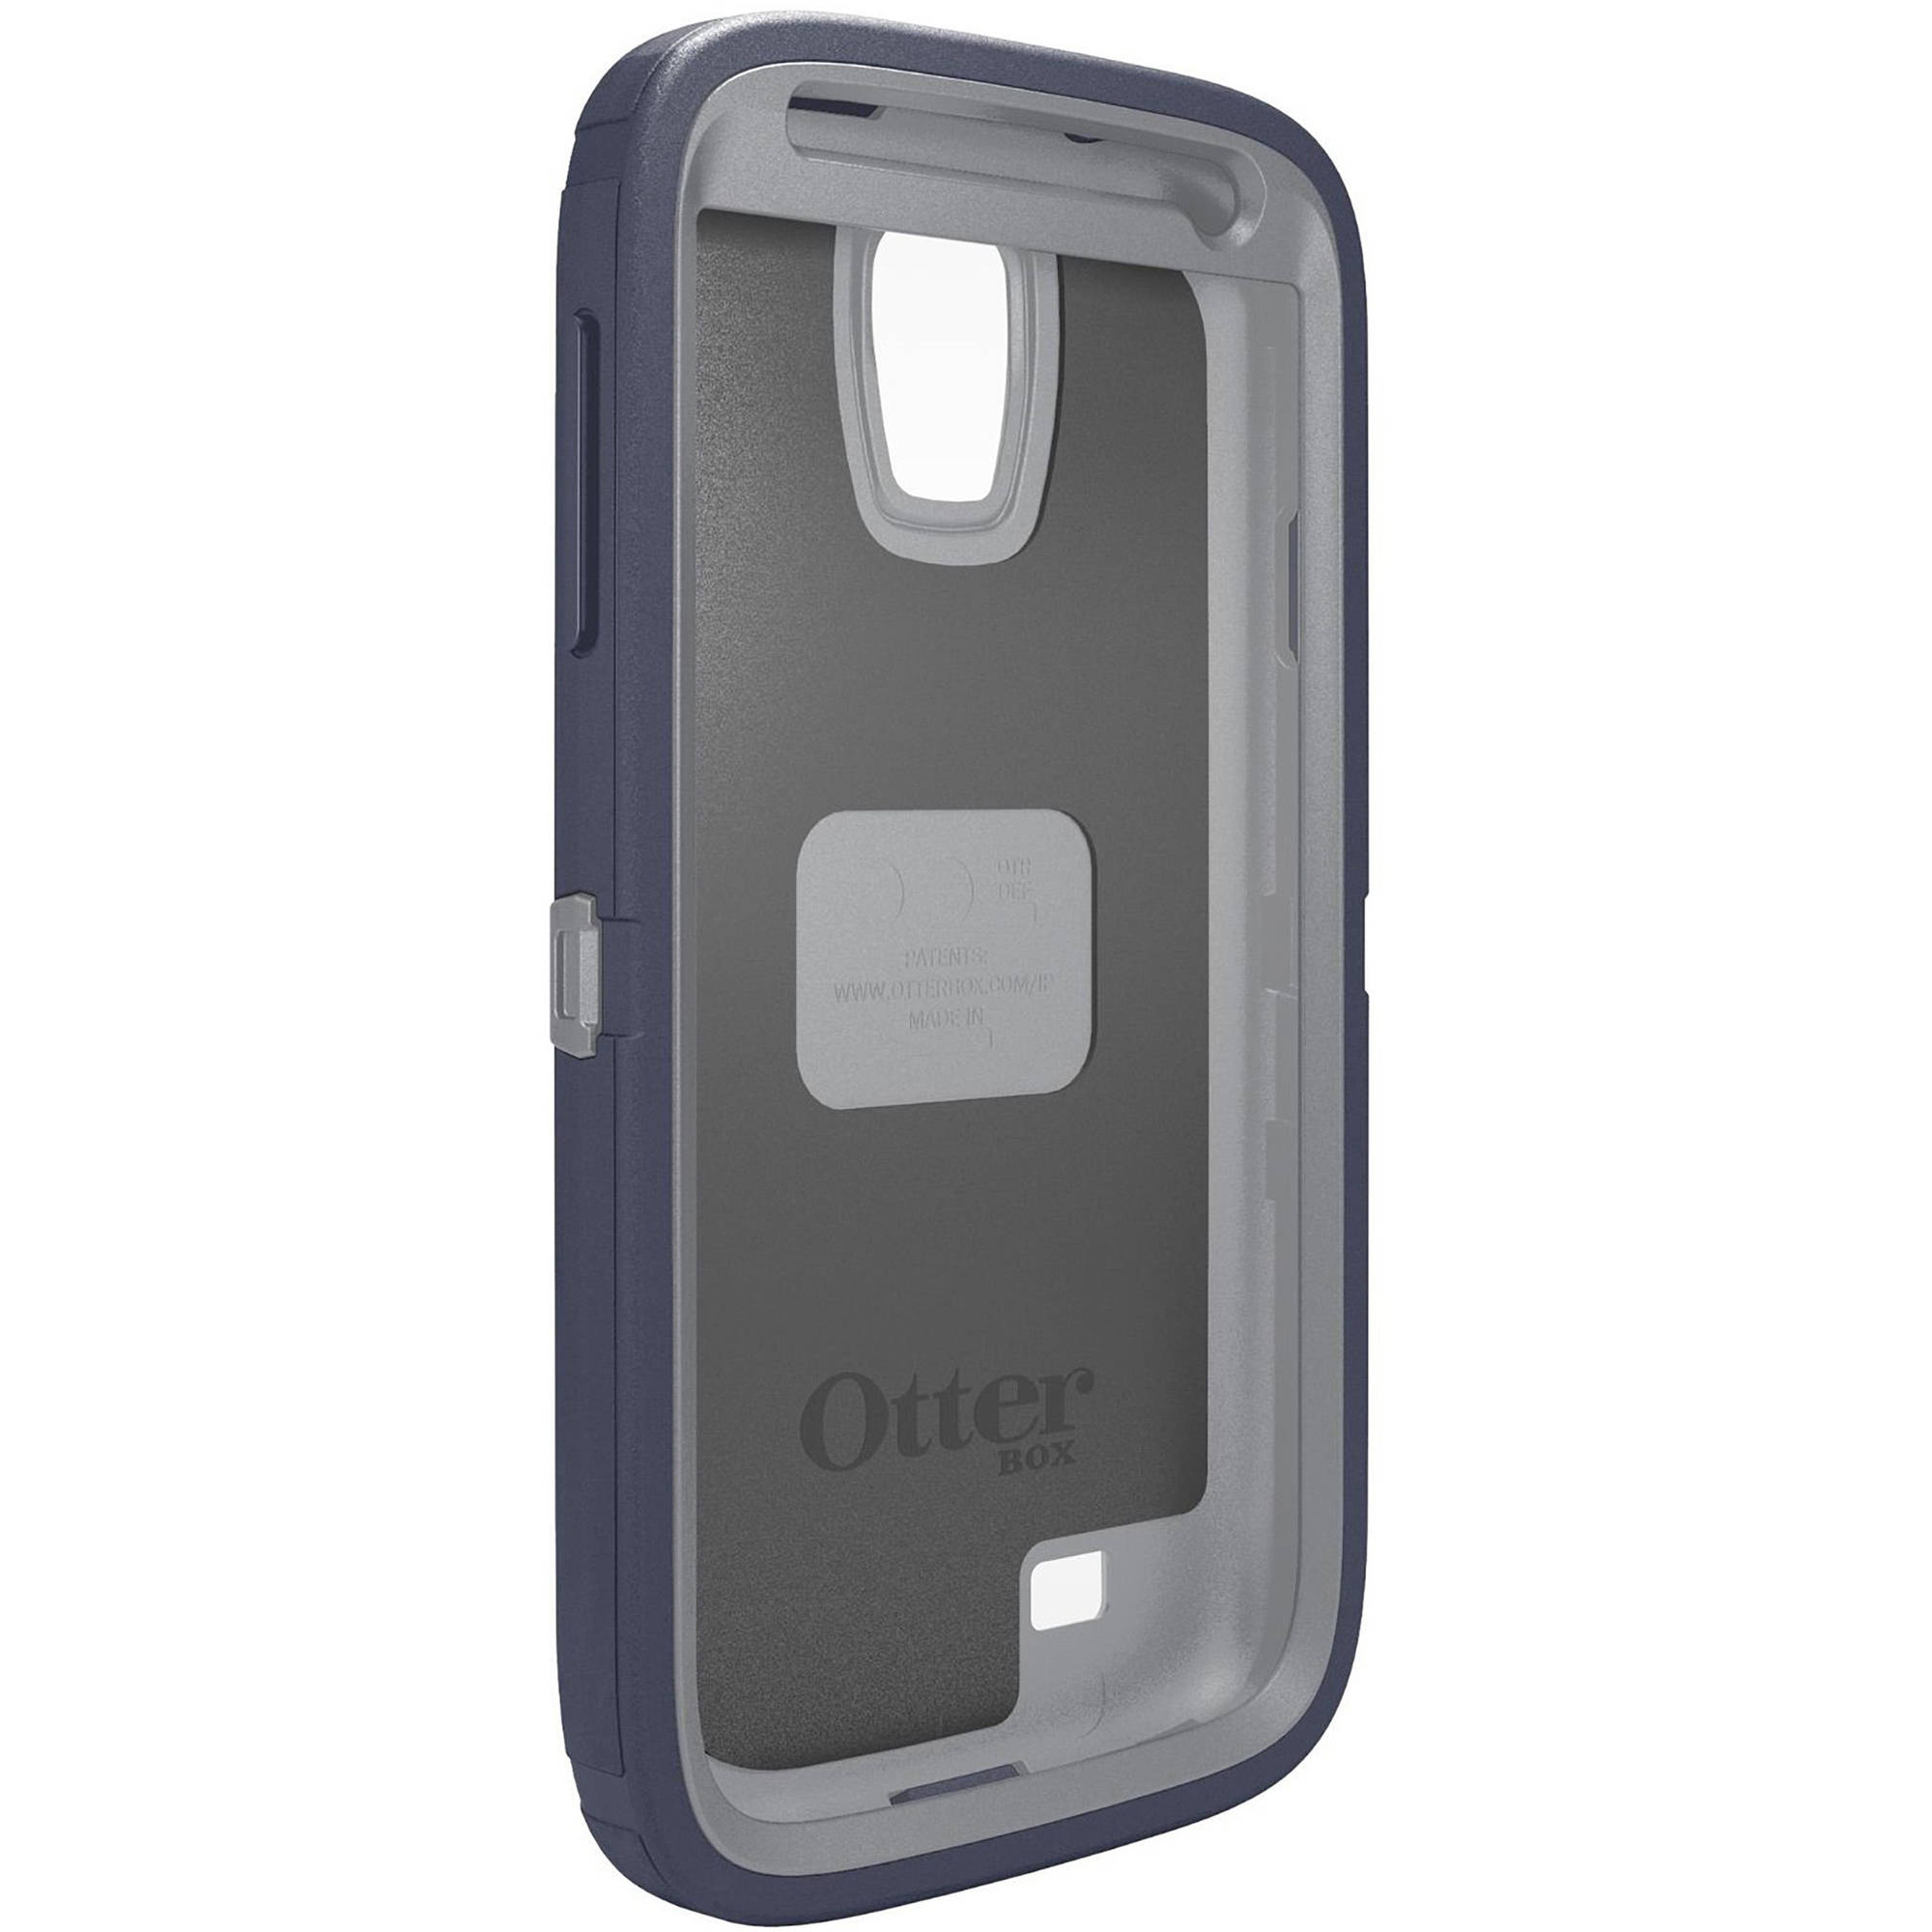 Galaxy S4  Otterbox defender series case - image 2 of 6